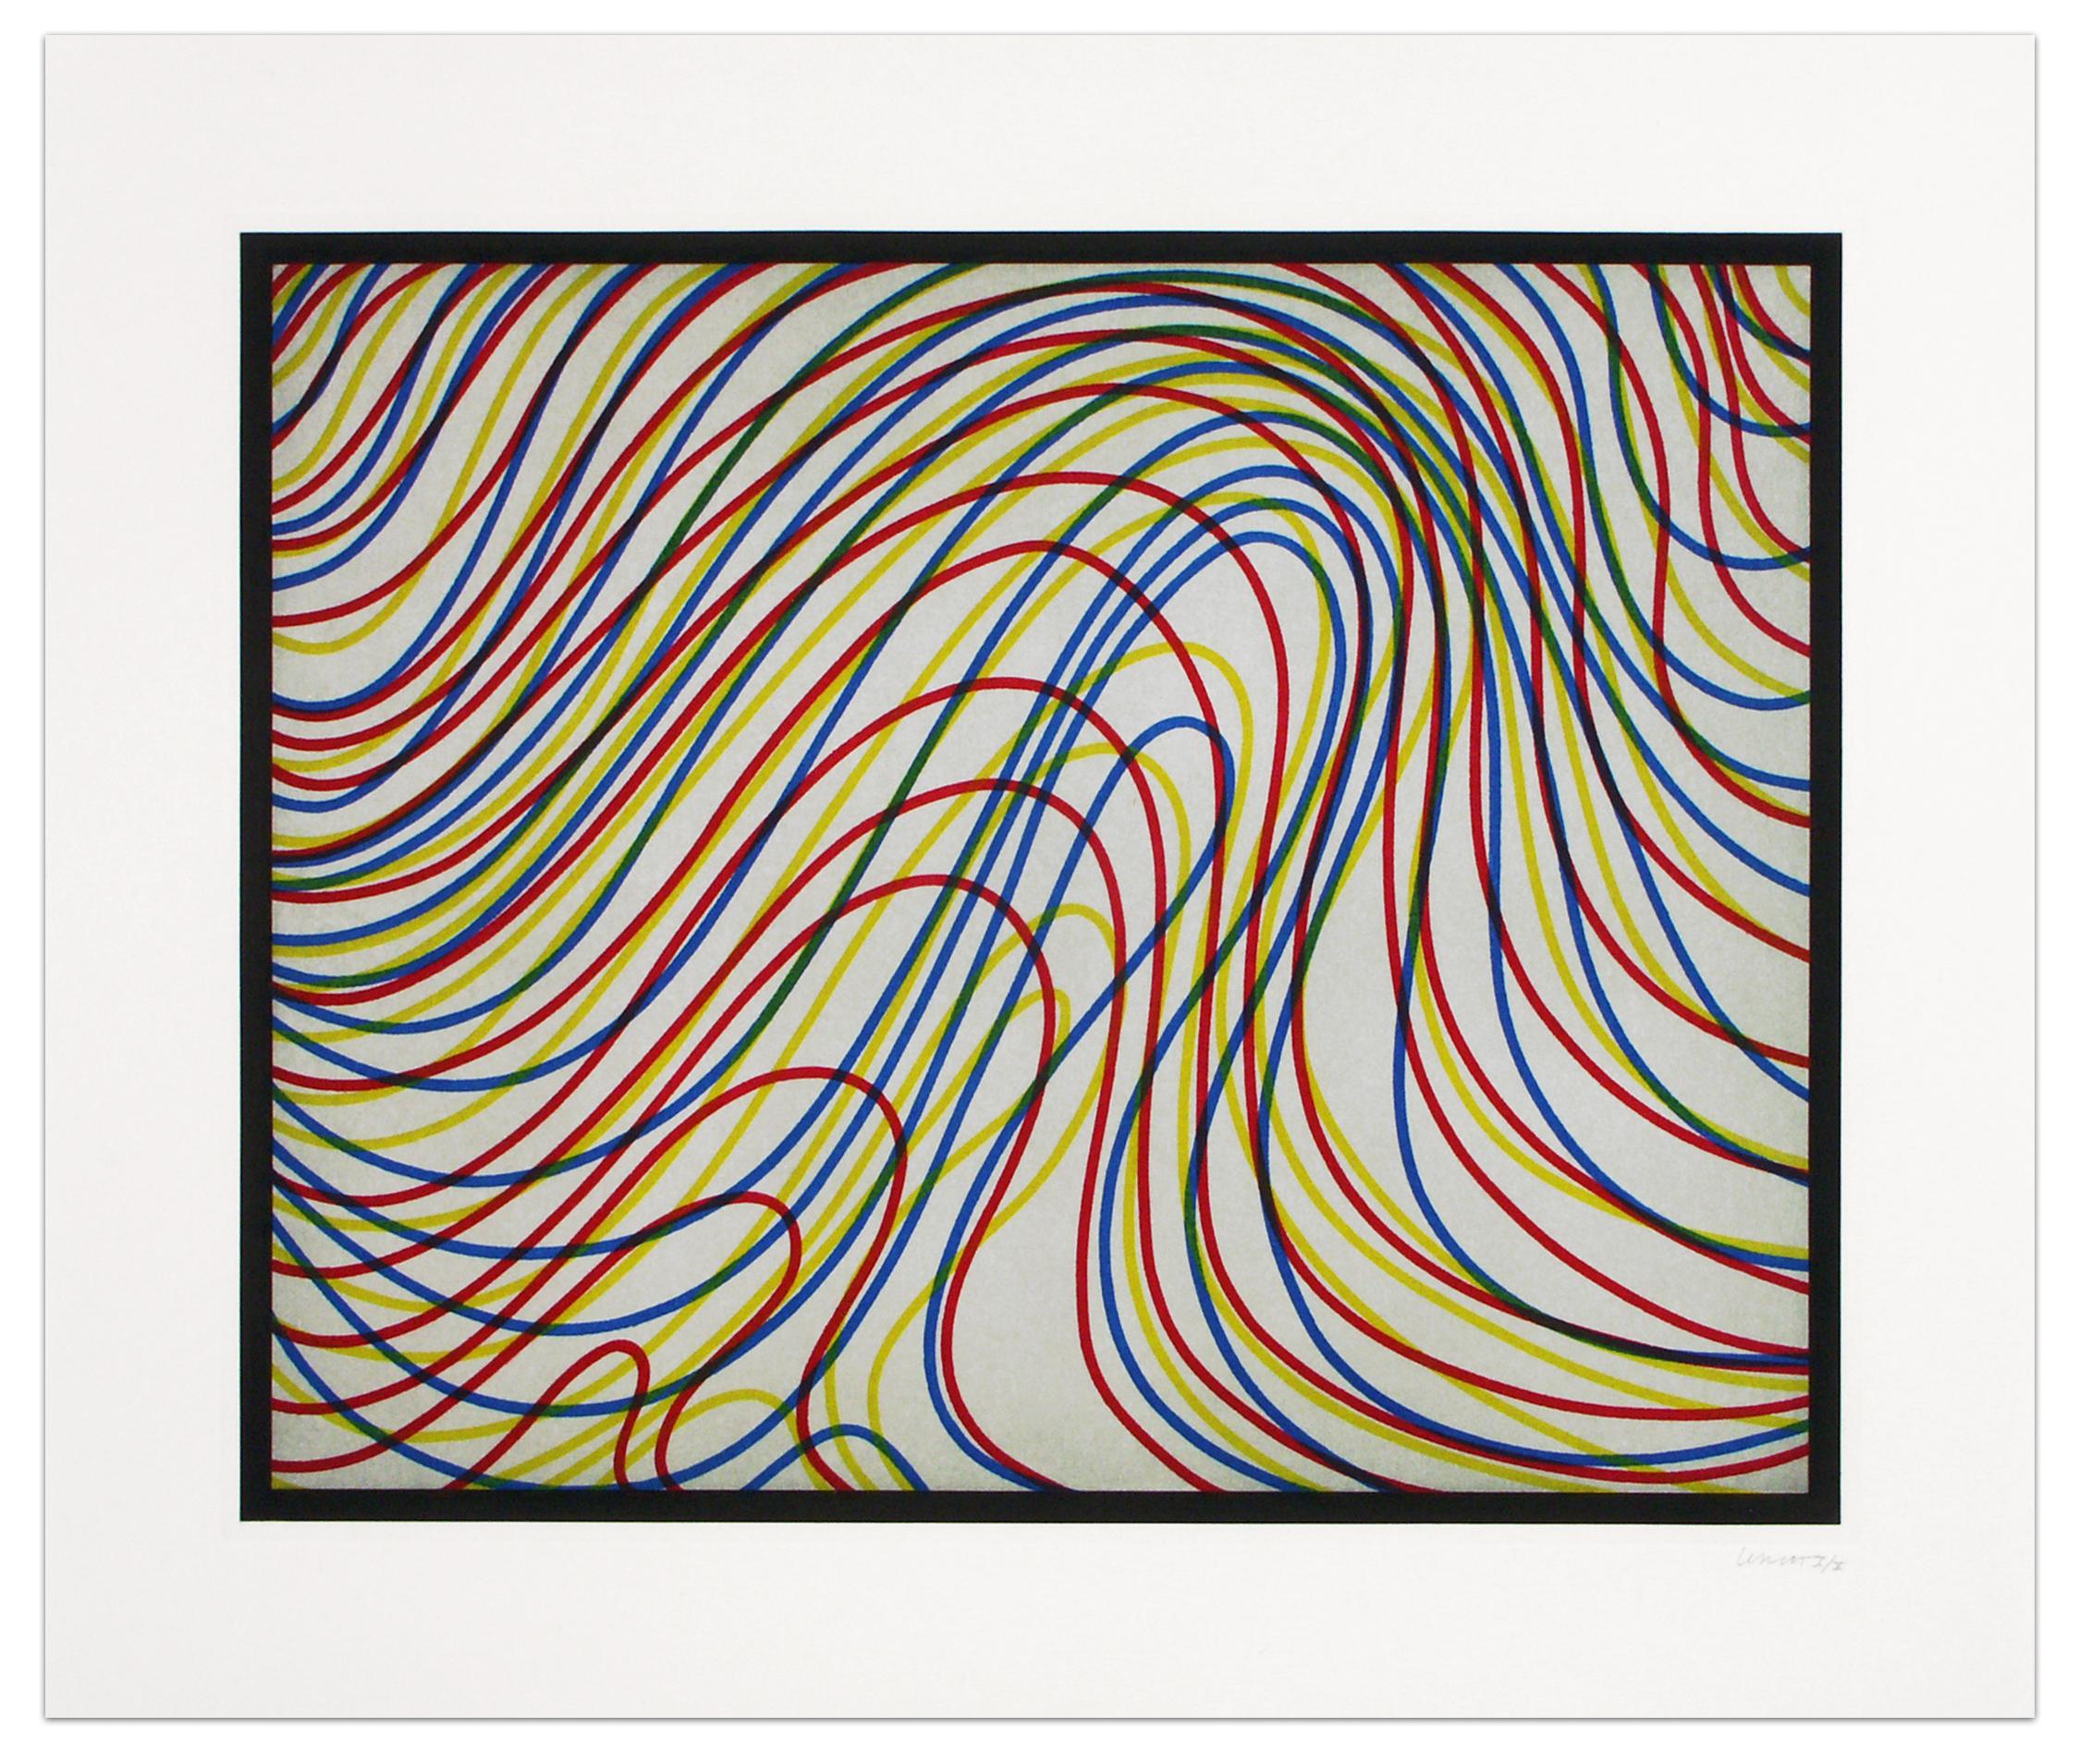 Wavy Lines with Black Border - Print by Sol LeWitt